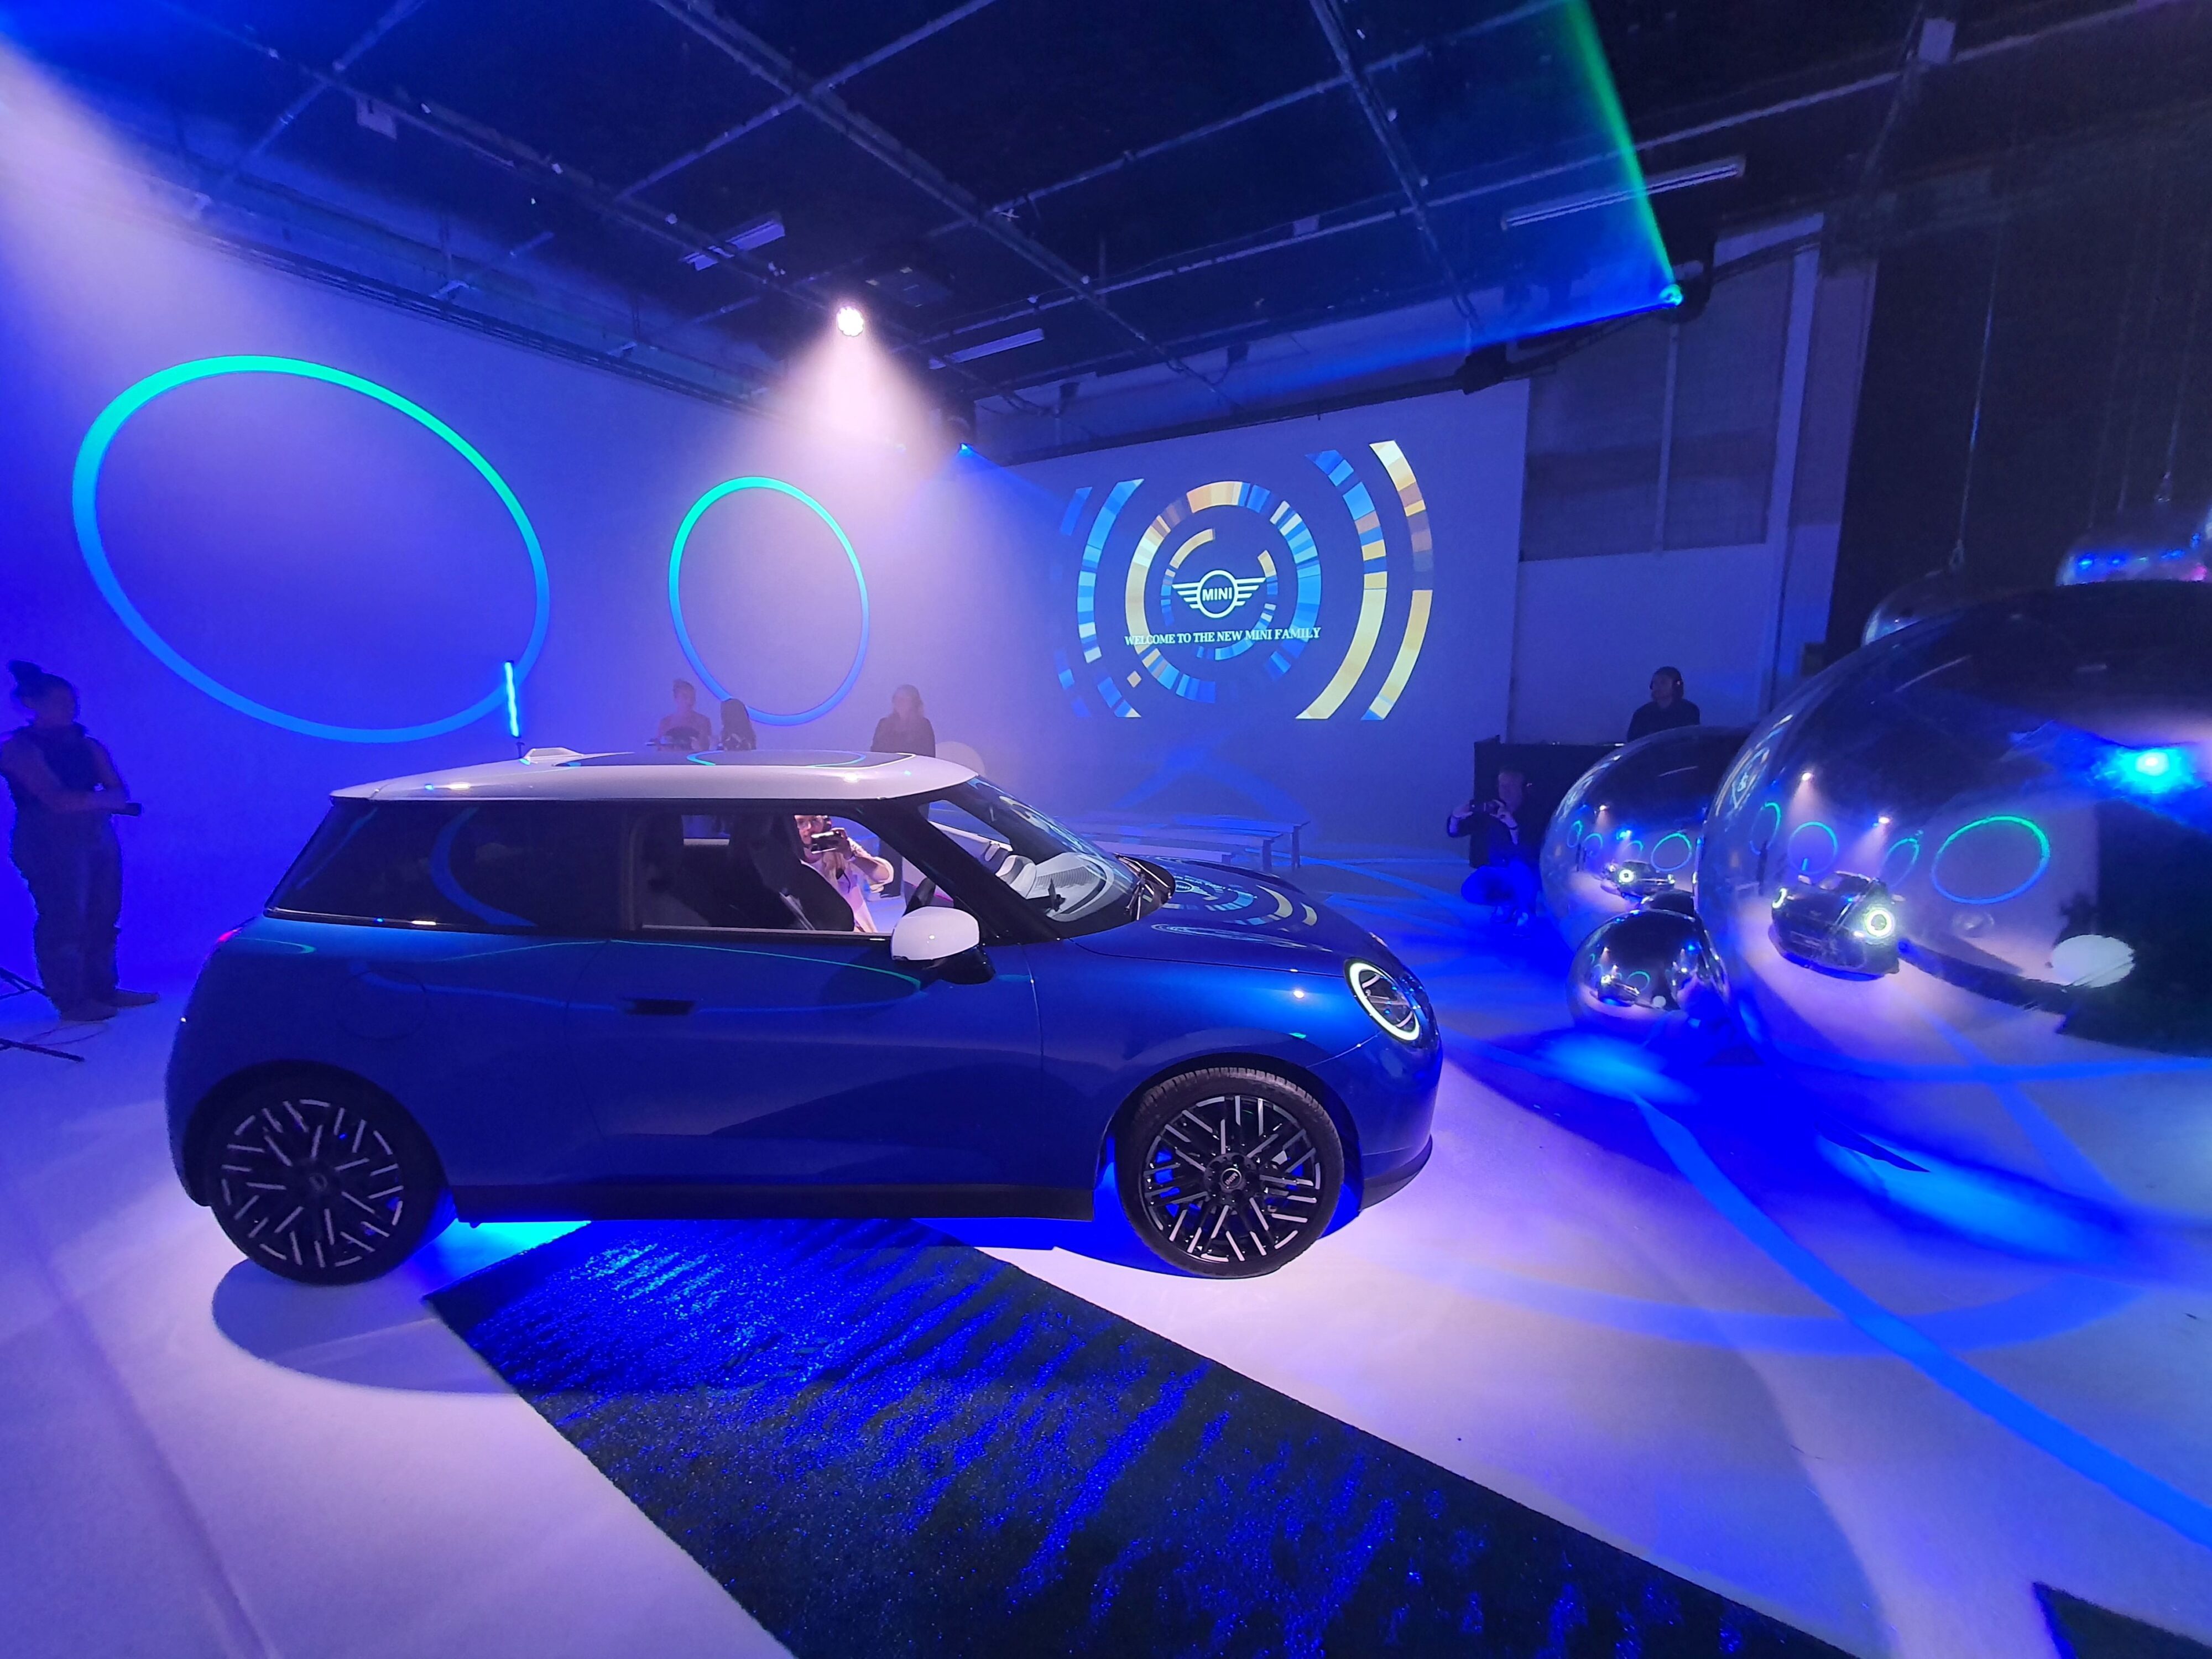 A wide angle shot of the sensory experience room as part of Mini's new design language unveiling.